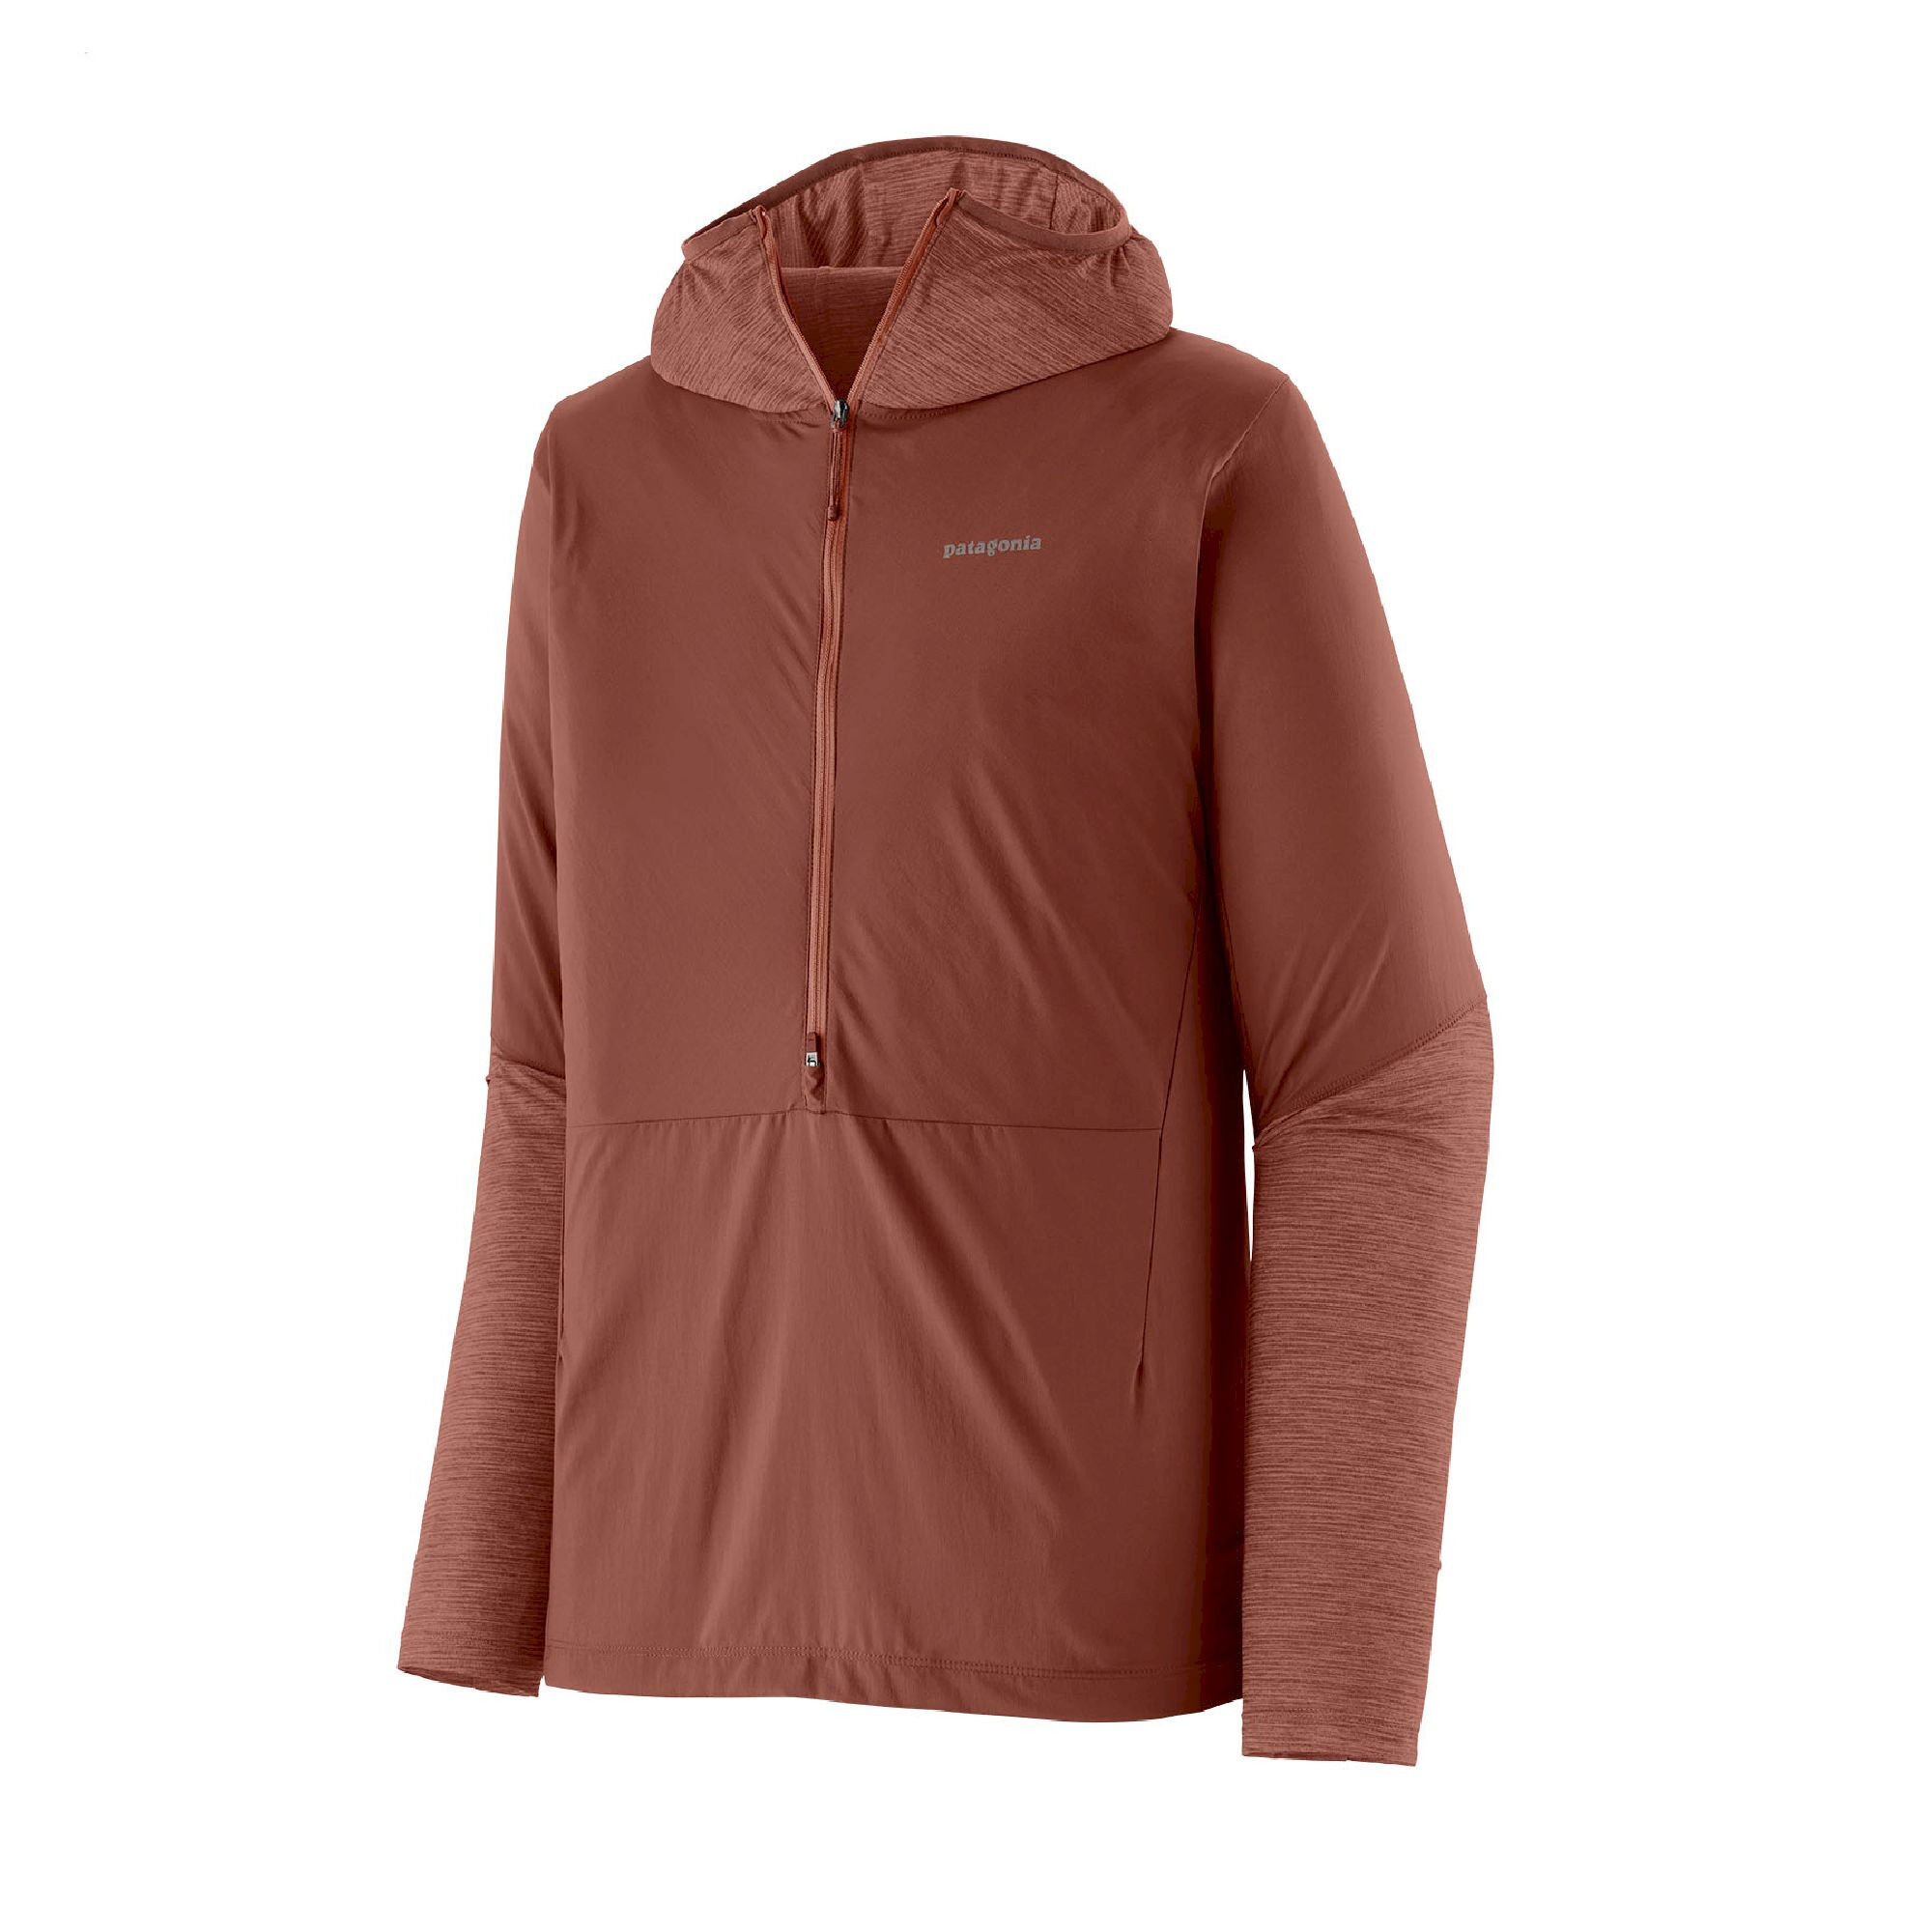 Patagonia Airshed Pro Pullover - Forro polar - Hombre | Hardloop